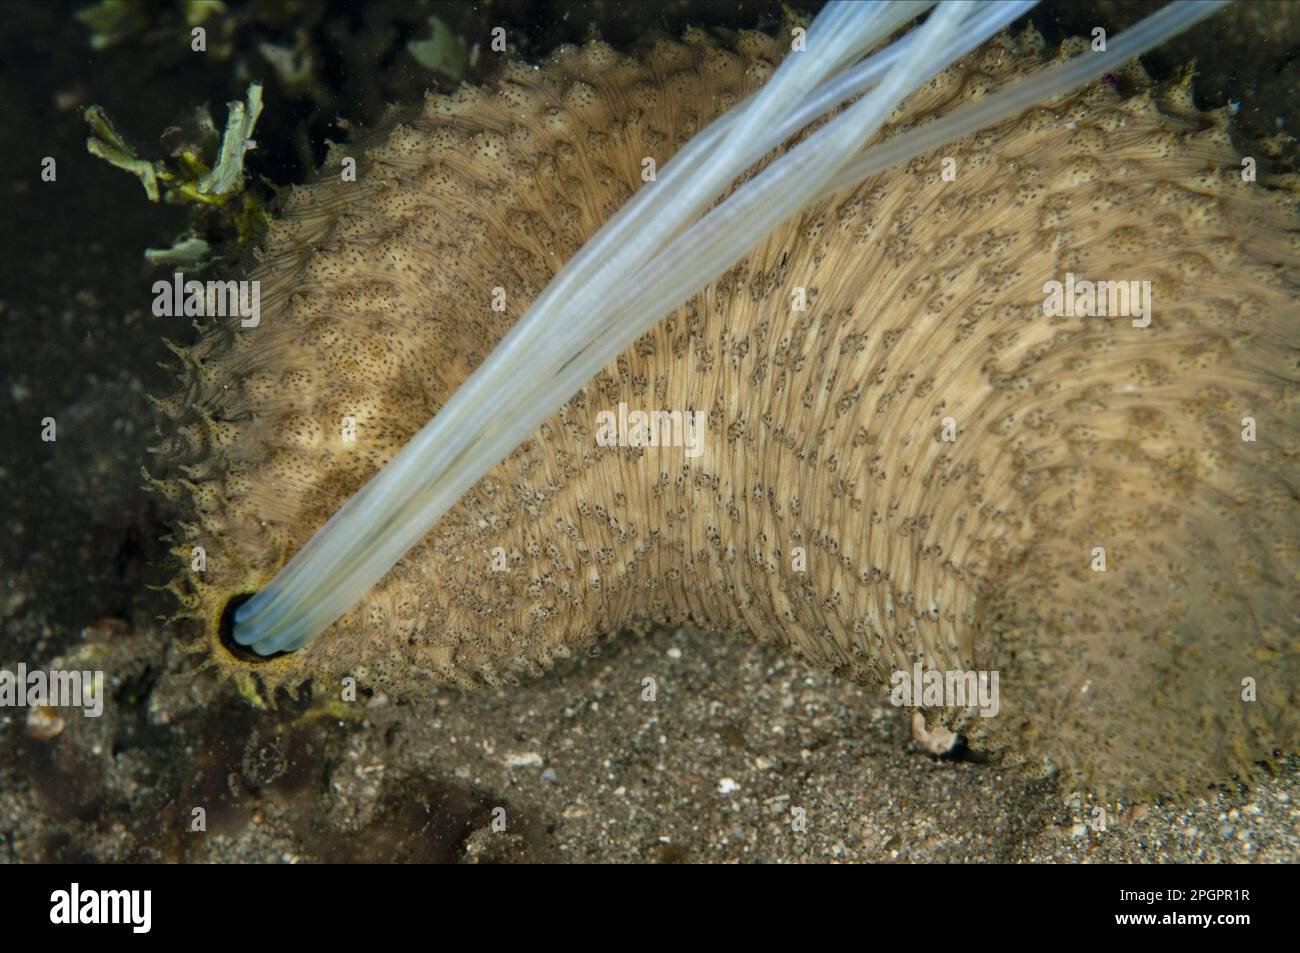 Light-sensitive adult sea cucumber (Holothuria impatiens) expelling sticky defensive cuivierian respiratory tubules at night, Manado, Sulawesi Stock Photo